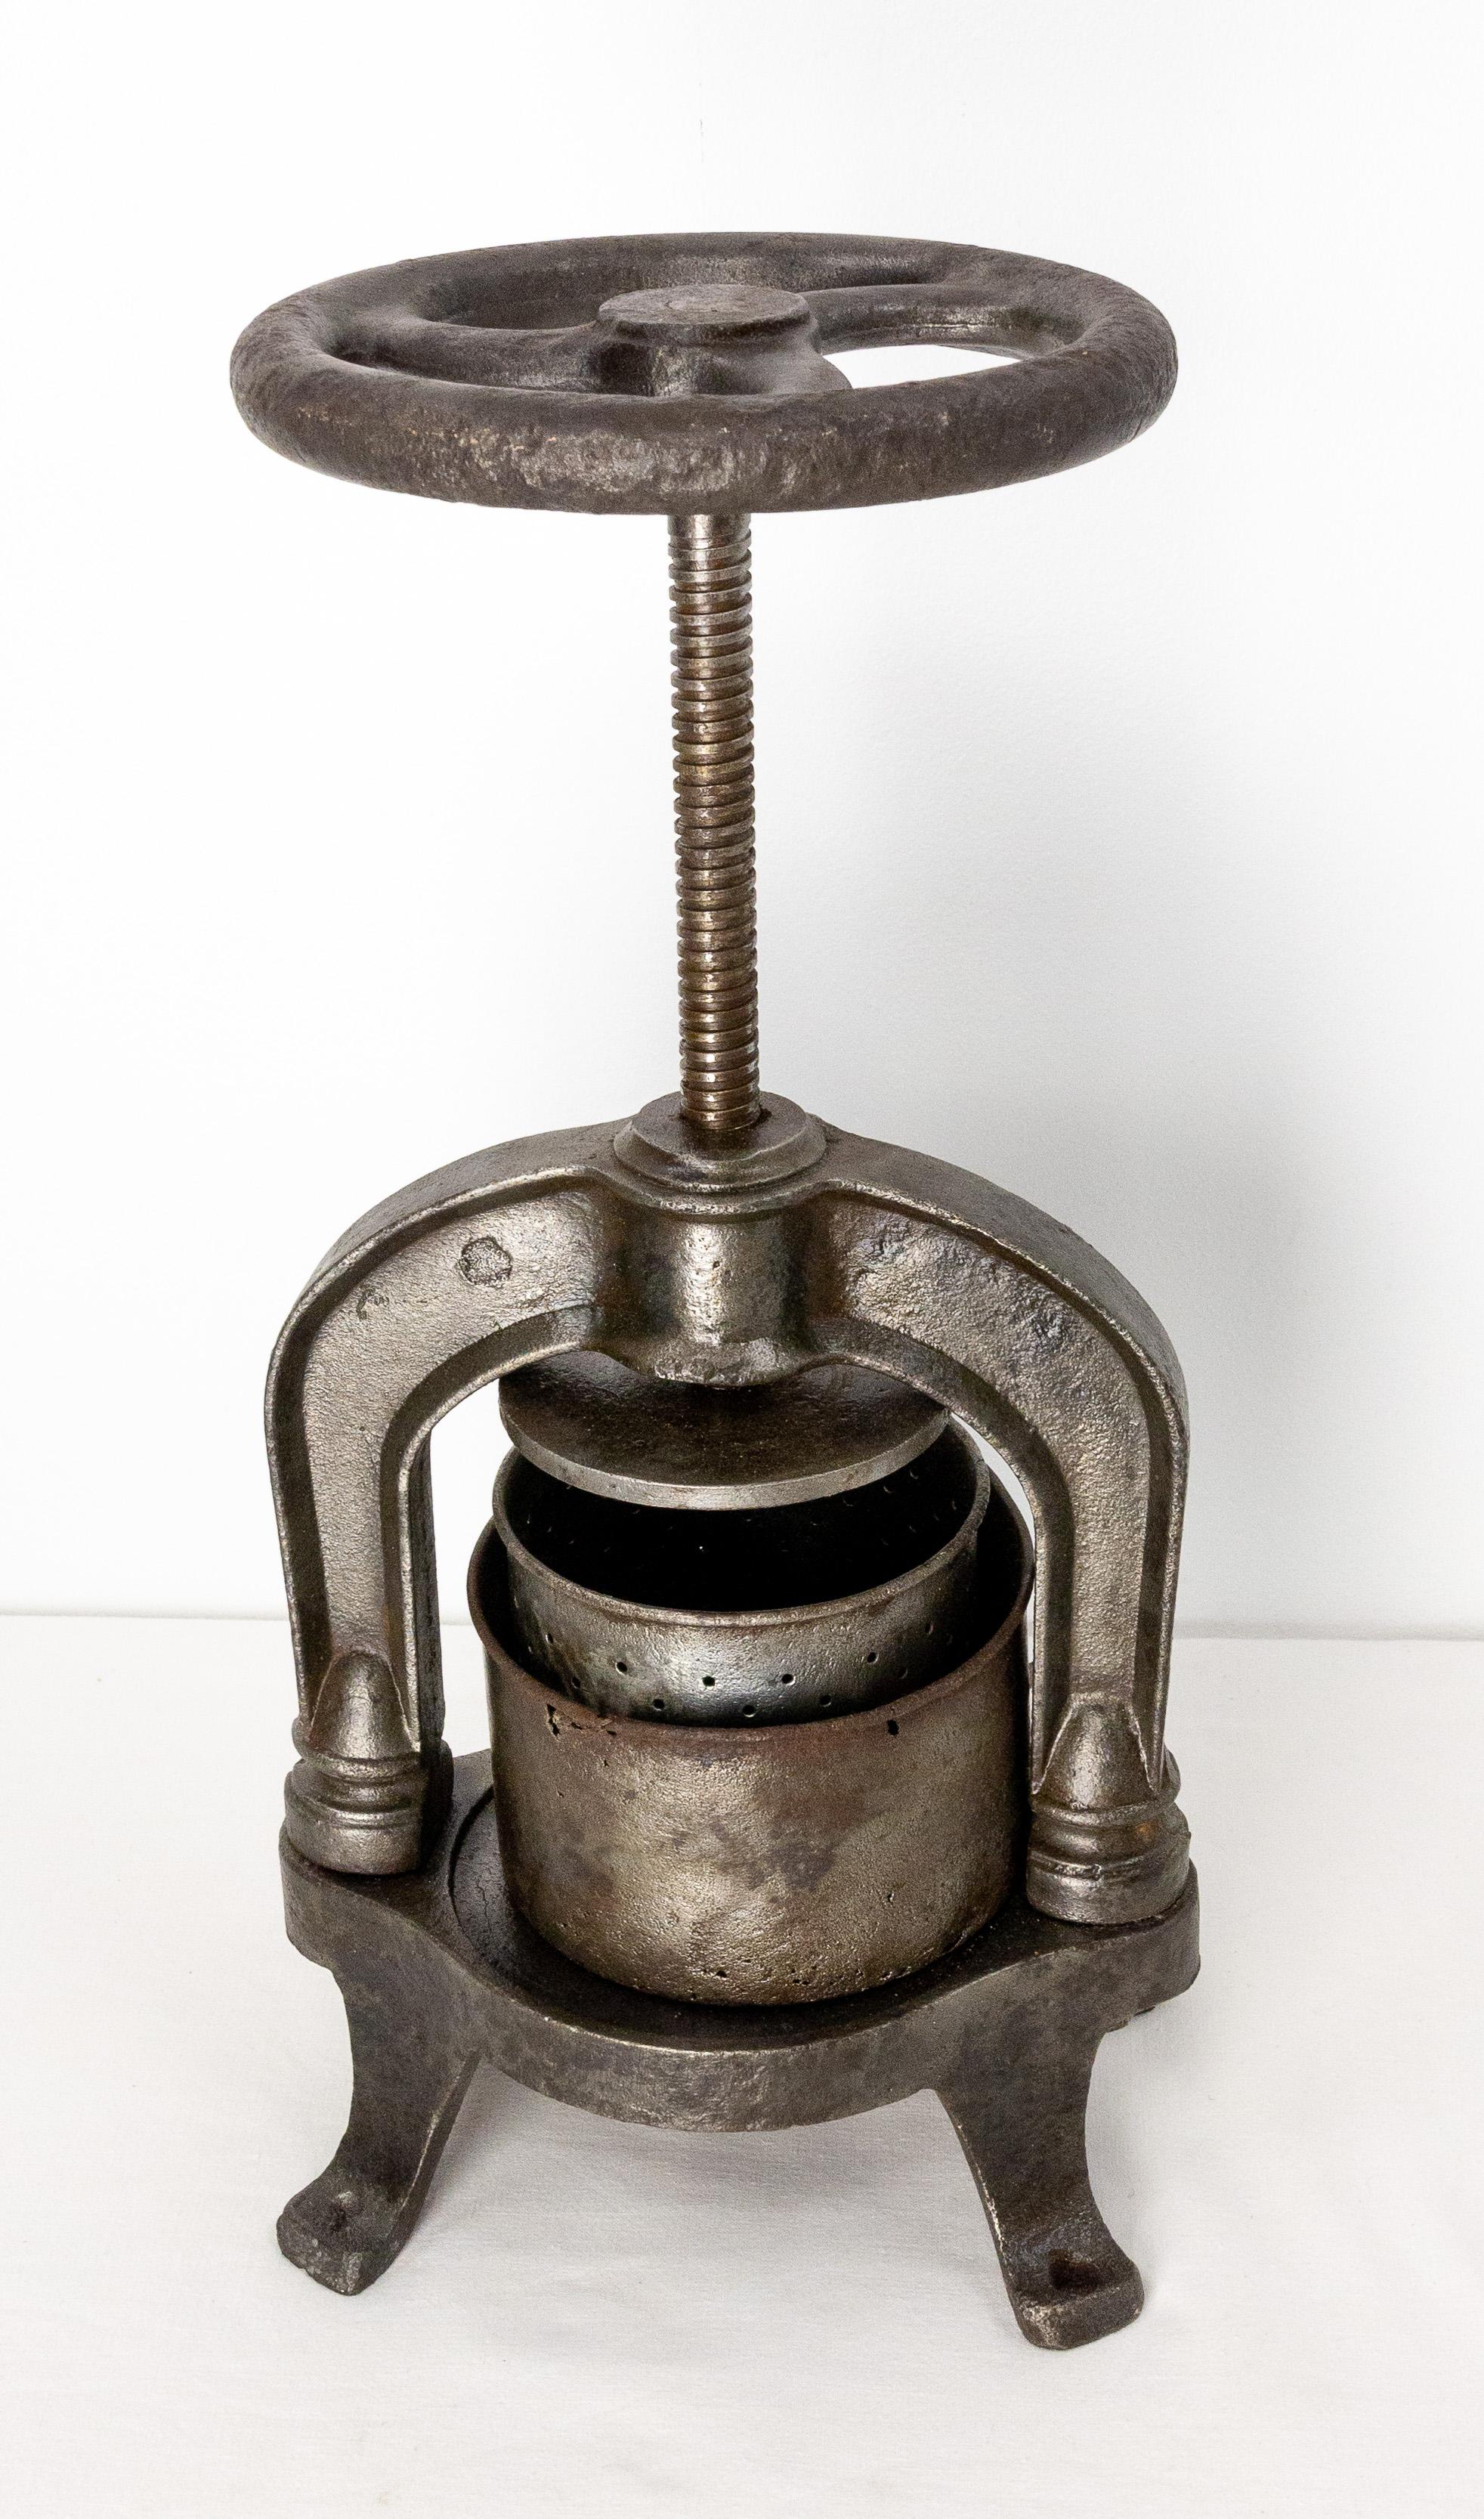 This cast iron fruit press was made in the late 19th century in France.
It was probably used by the little fruit producers to make olive oil or fruit juice. 
Patina and signs of use which make this antique object very characterful.
Good condition